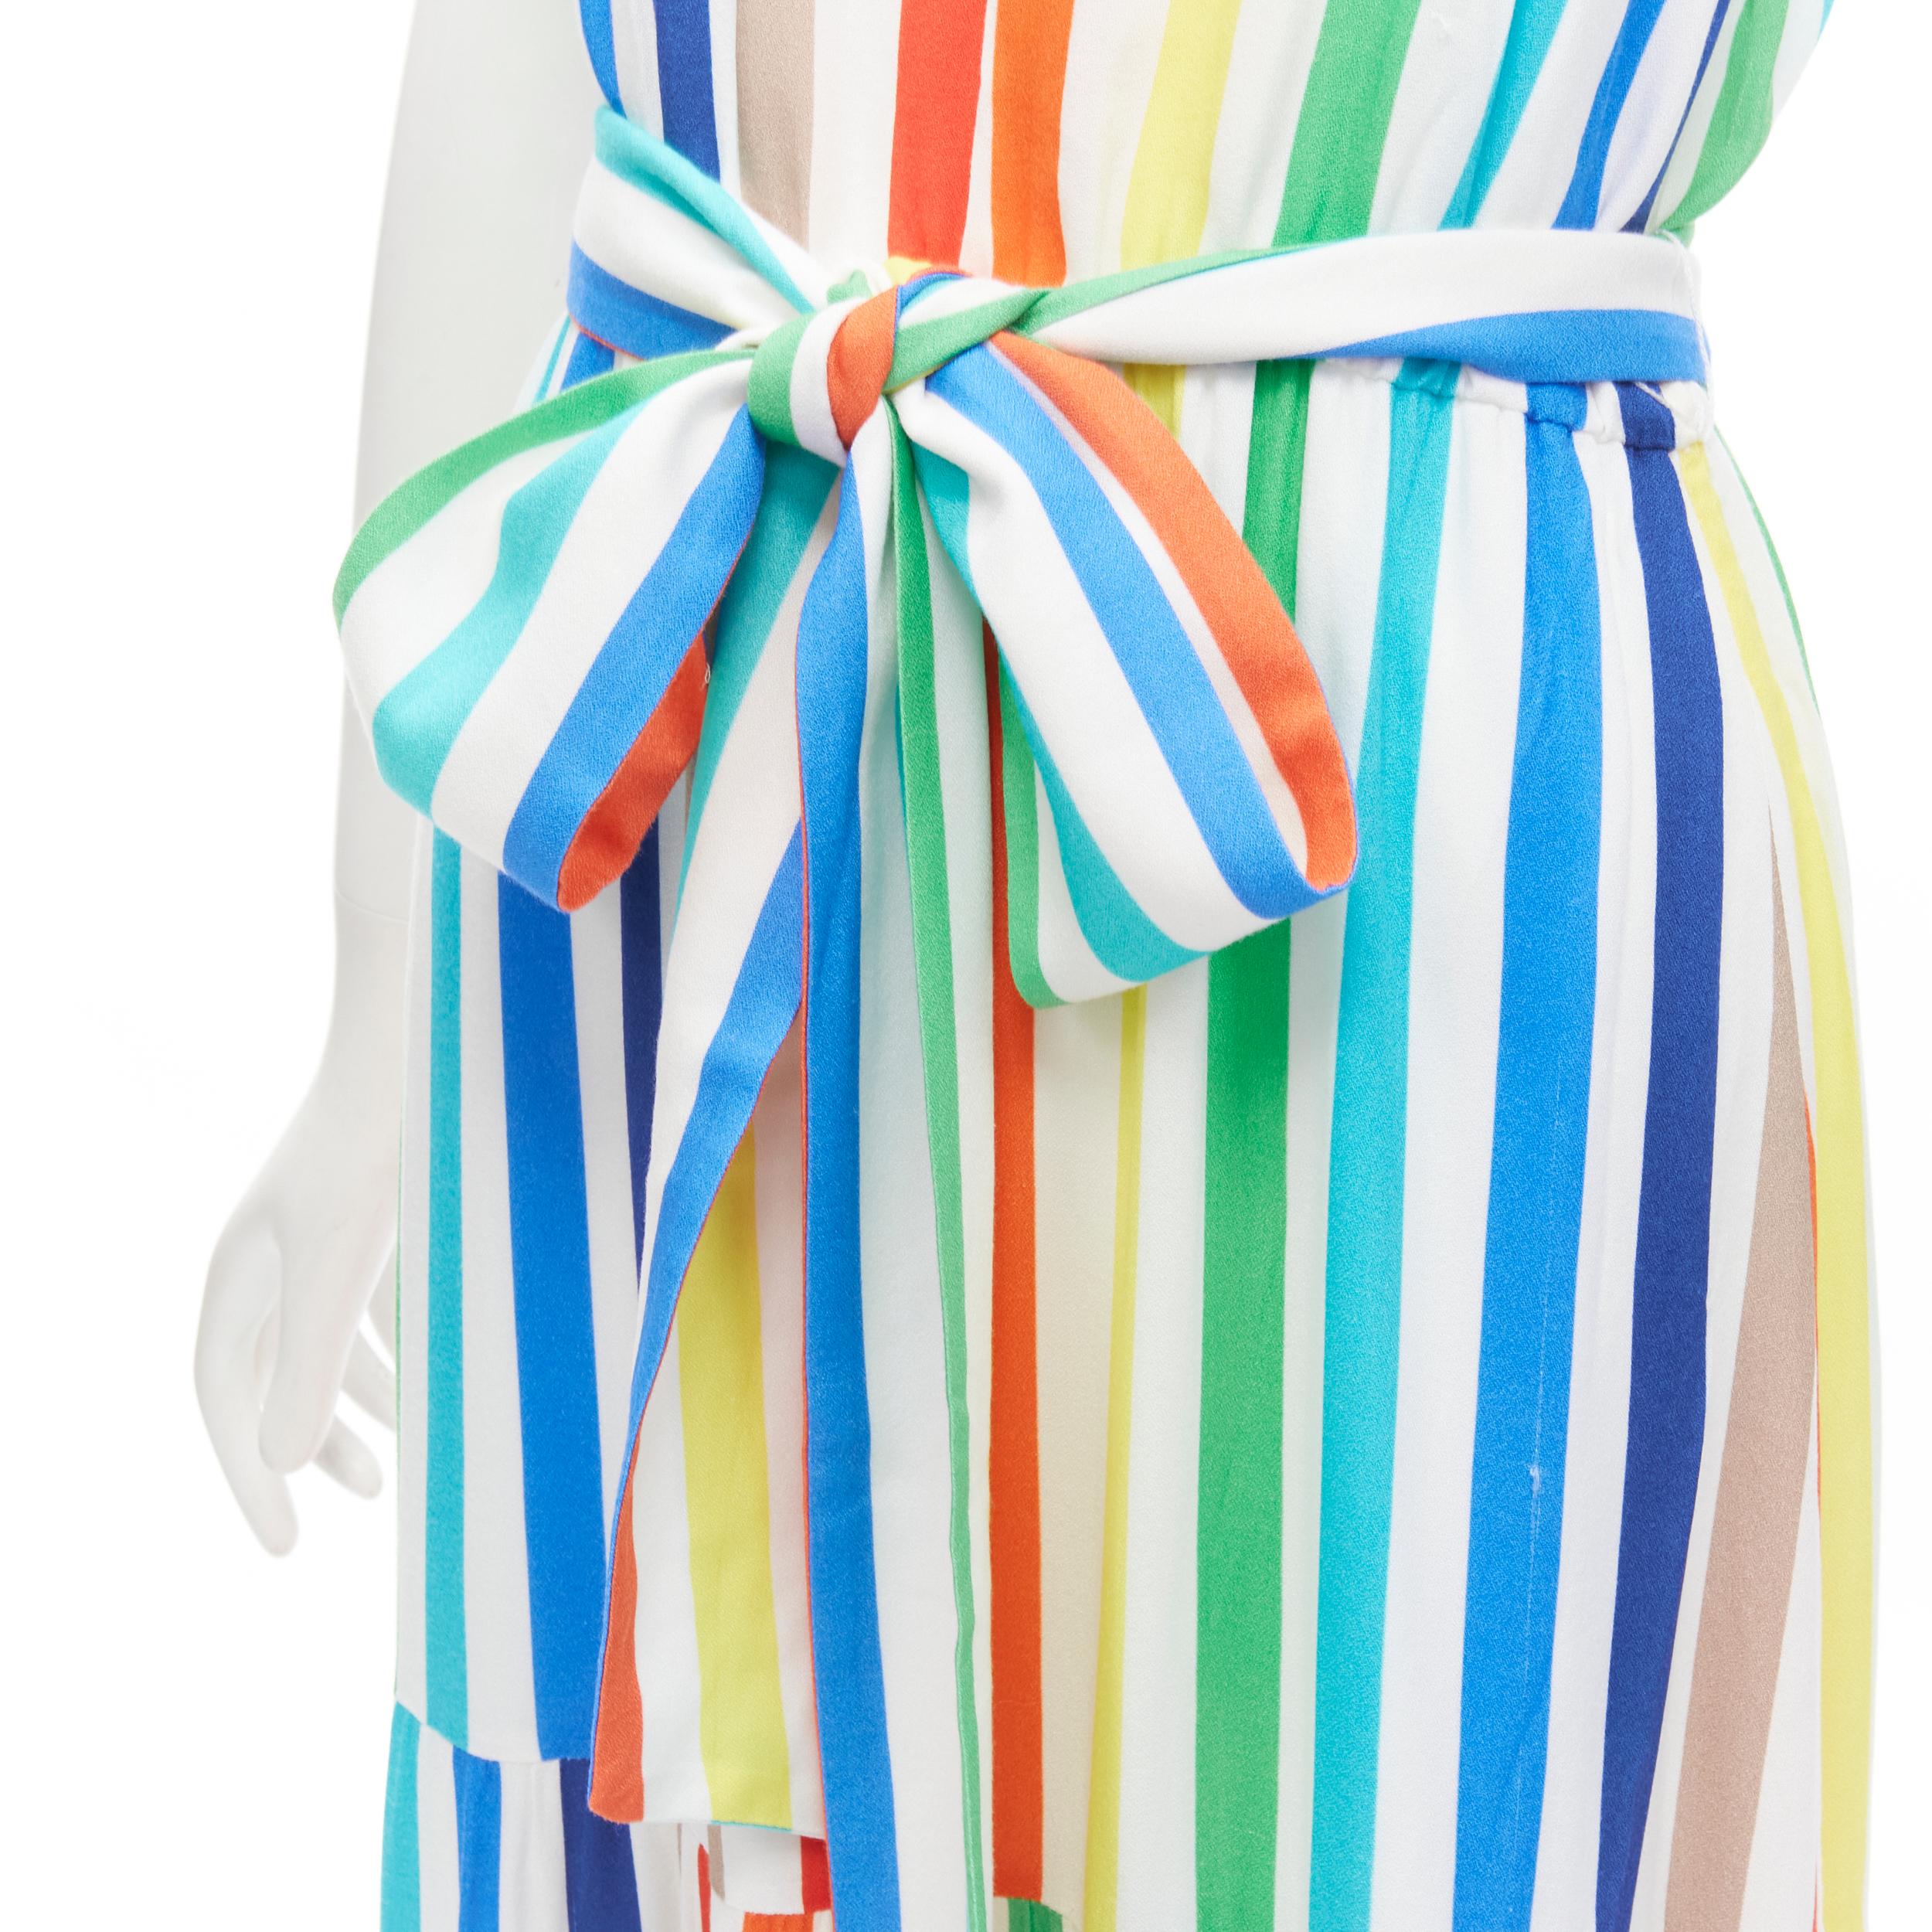 ALICE OLIVIA rainbow striped belted midi dress US4
Brand: Alice Olivia
Material: Viscose
Color: Multicolour
Pattern: Striped
Extra Detail: Self tie cinched waist. Spaghetti strap.
Made in: China

CONDITION:
Condition: Excellent, this item was